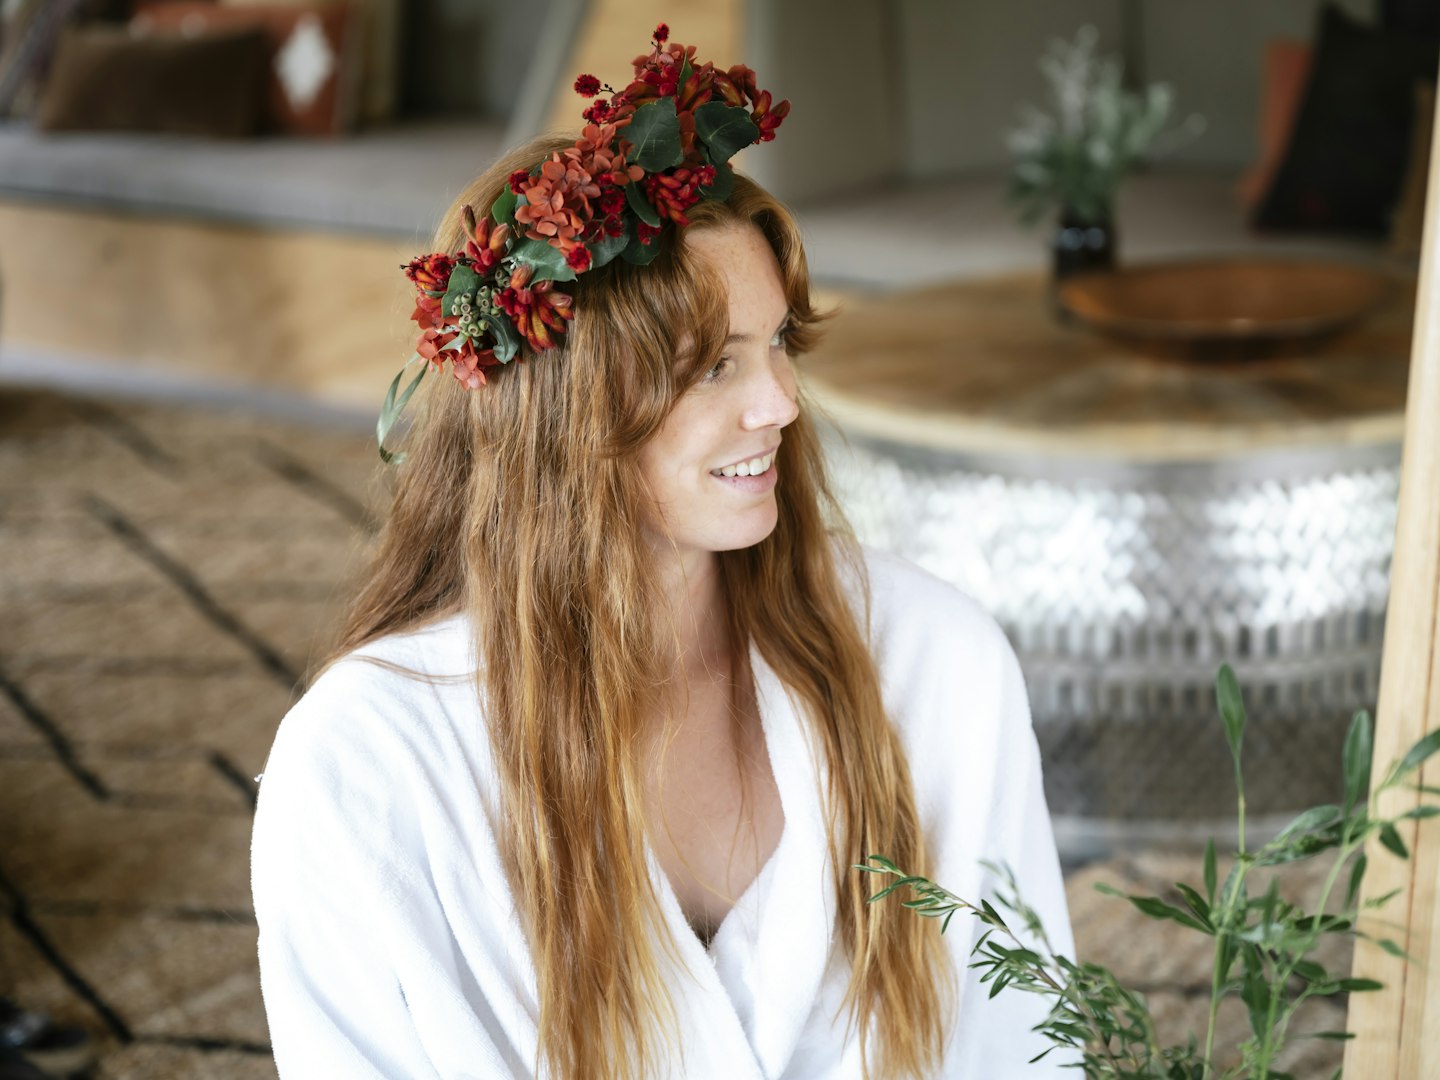 girl with wildflower crown on her head wearing white bath robe sits smiling in moroccan pavilion